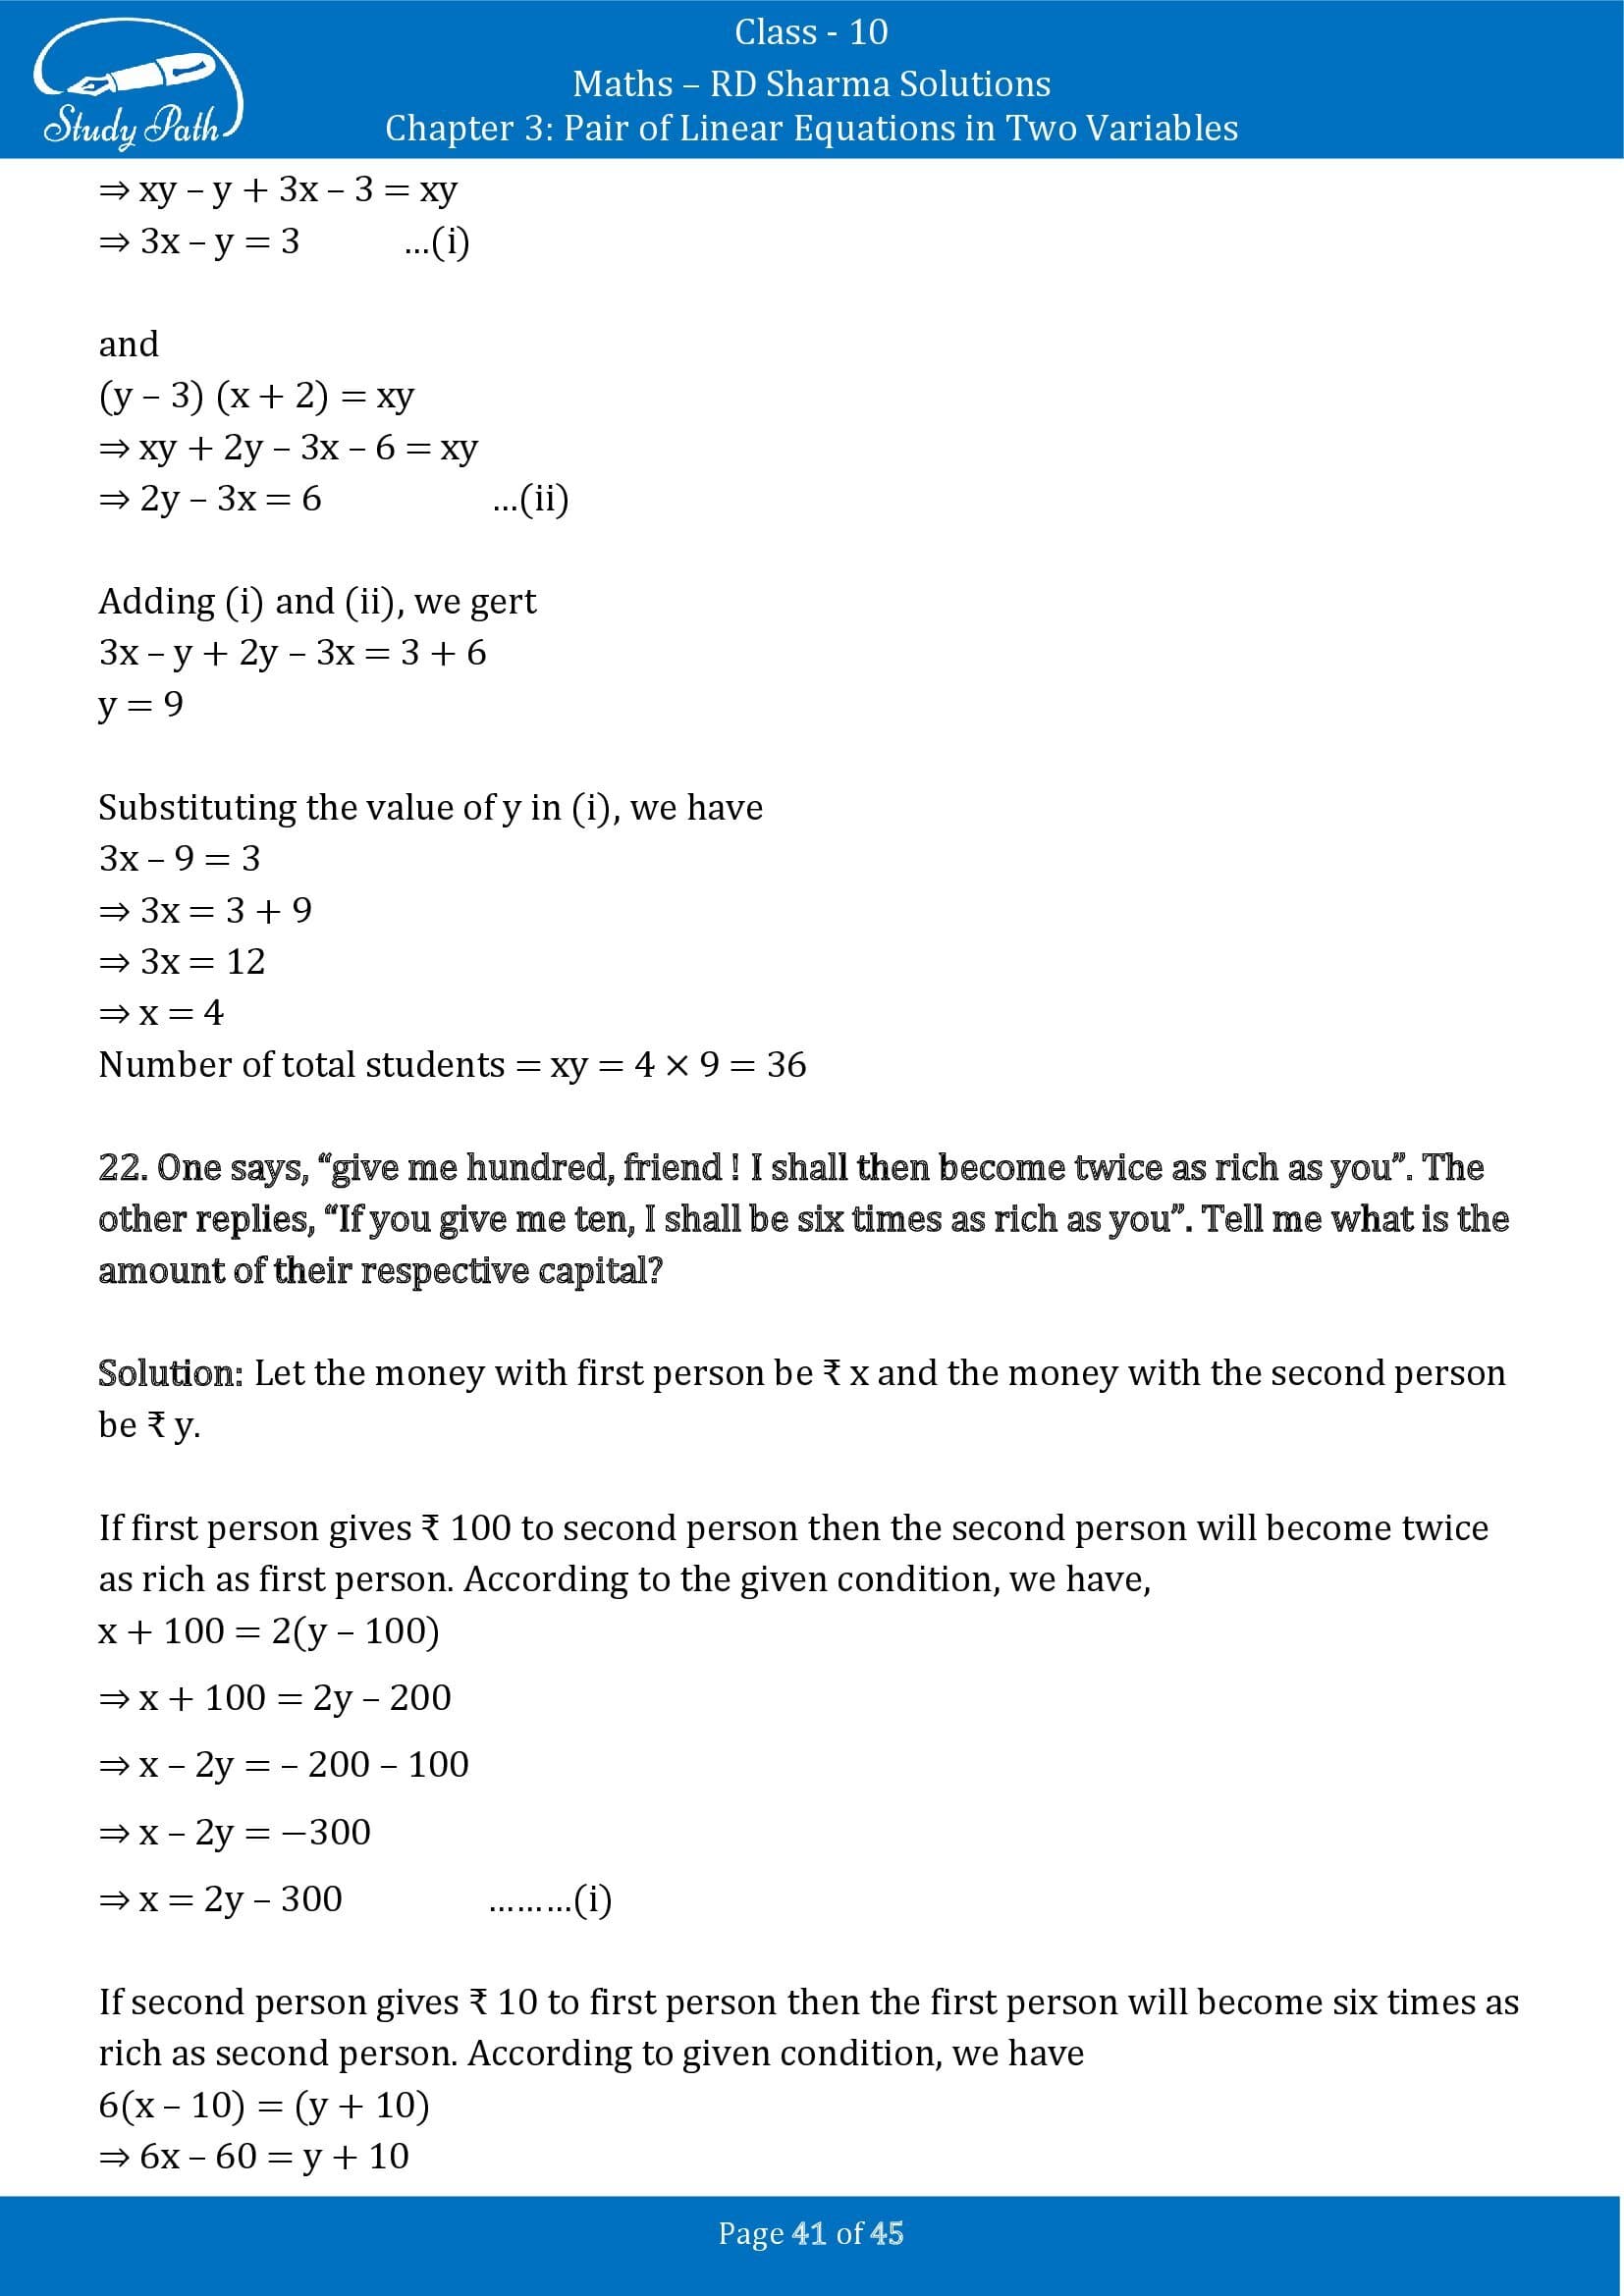 RD Sharma Solutions Class 10 Chapter 3 Pair of Linear Equations in Two Variables Exercise 3.11 00041